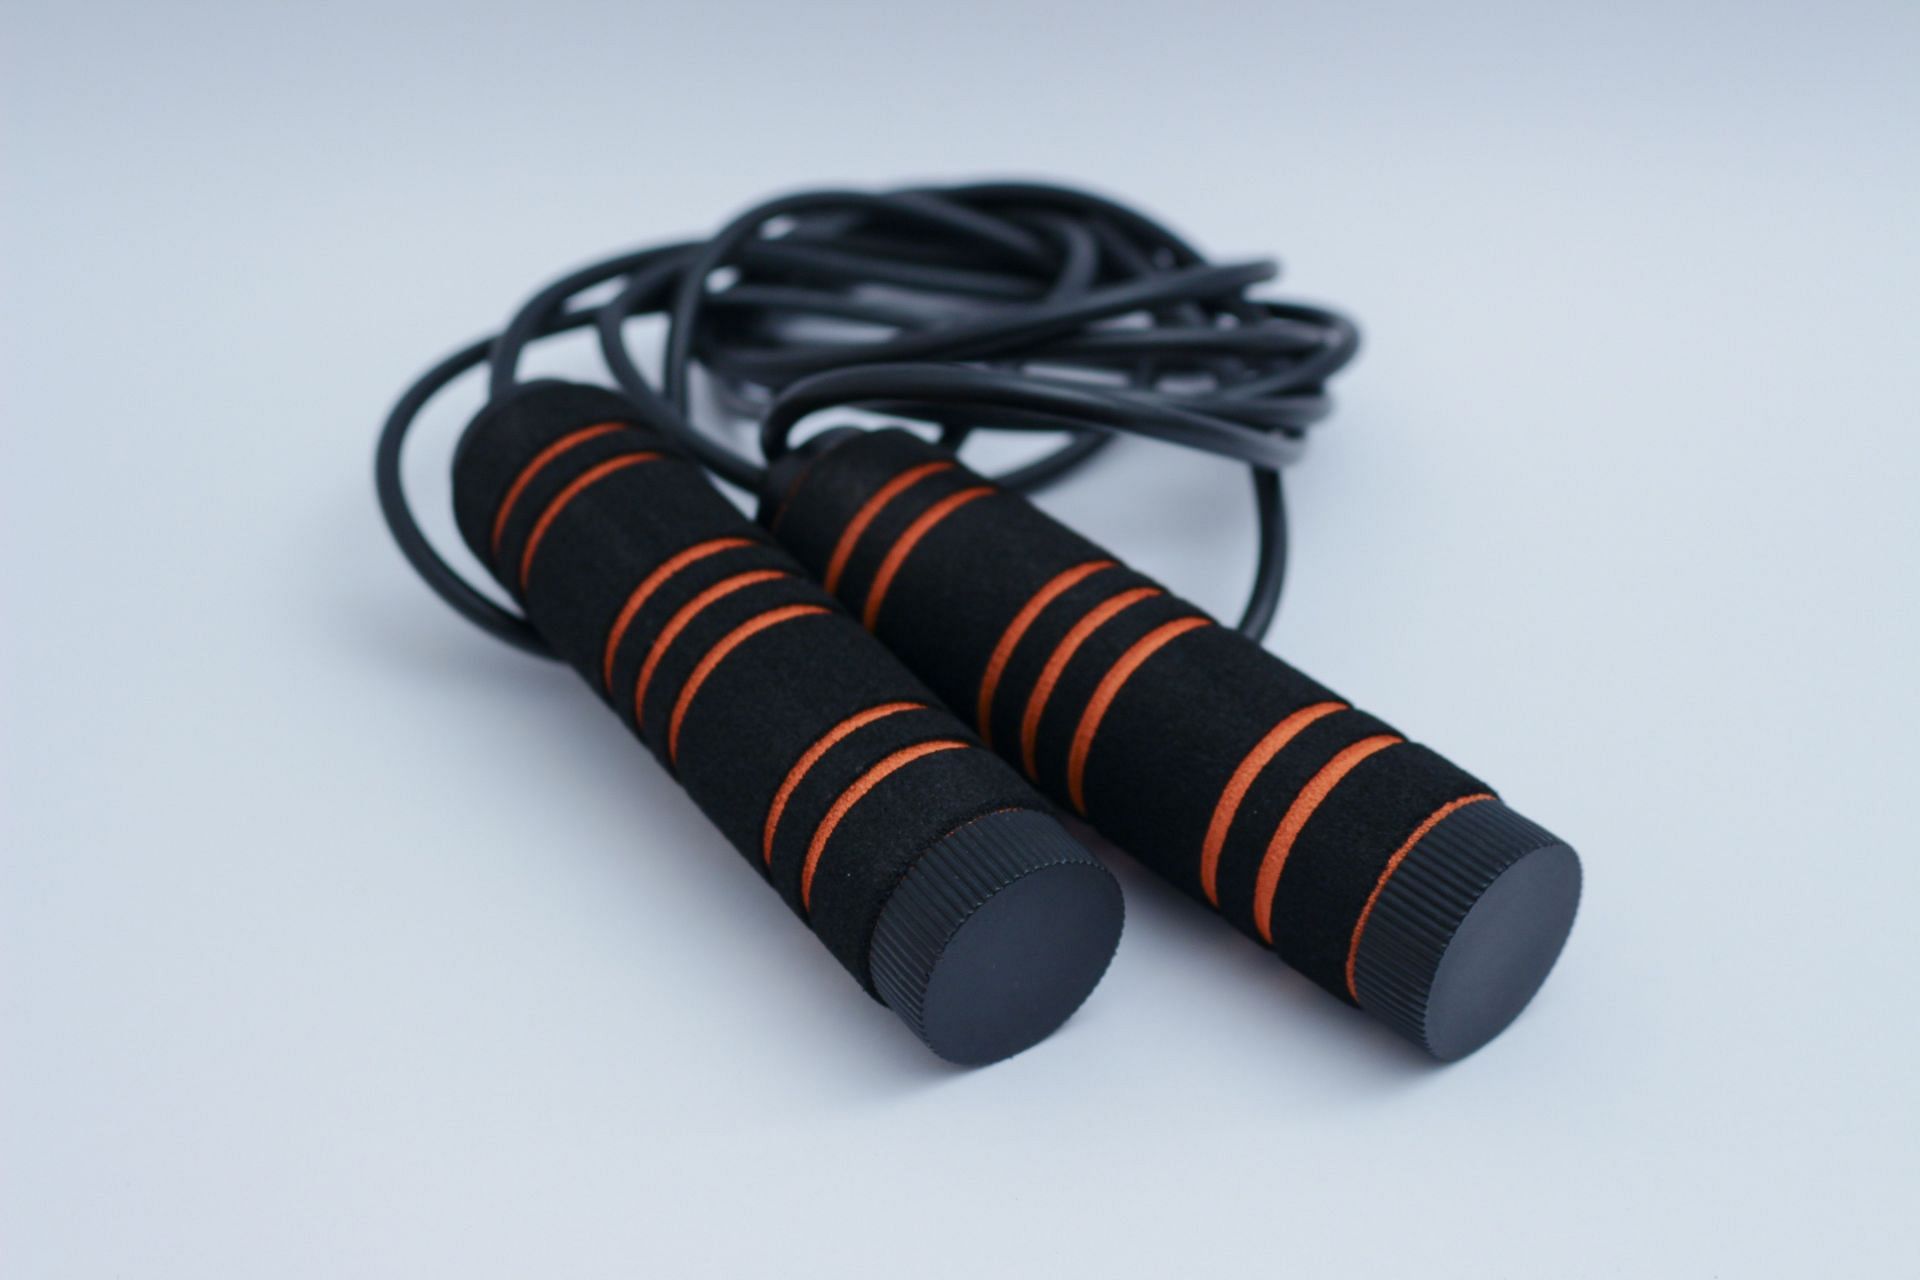 Jump rope exercises are a fun way to stay fit and healthy (Image via Pexels @Dom J)